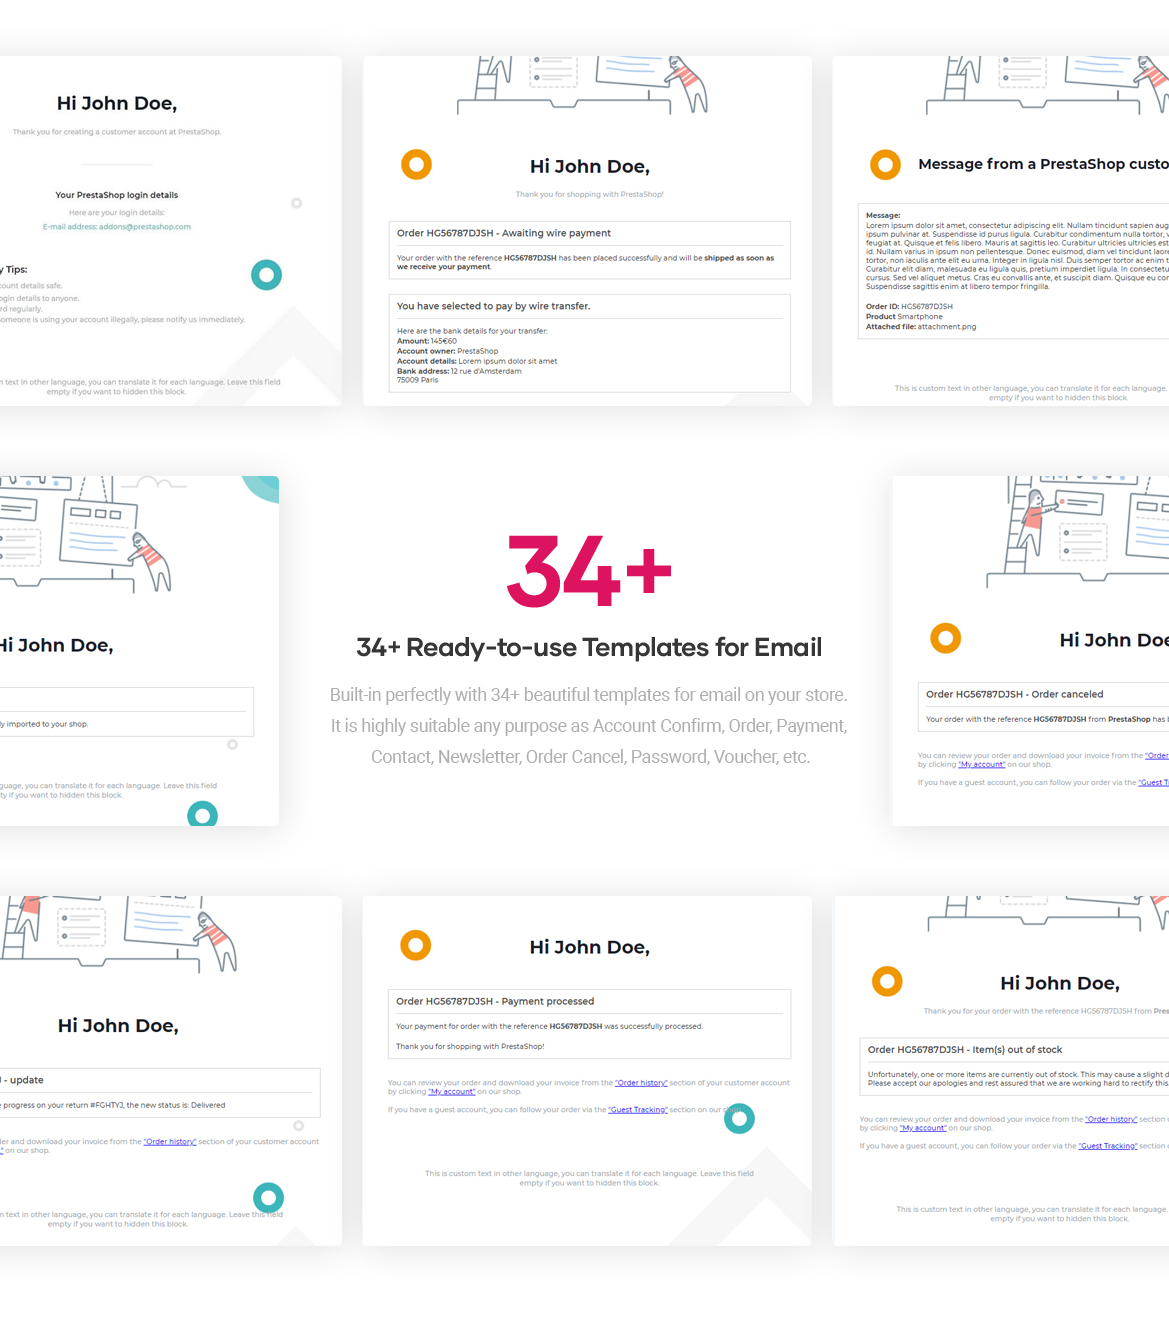 34+ Eye-catchy Built-in Email Templates